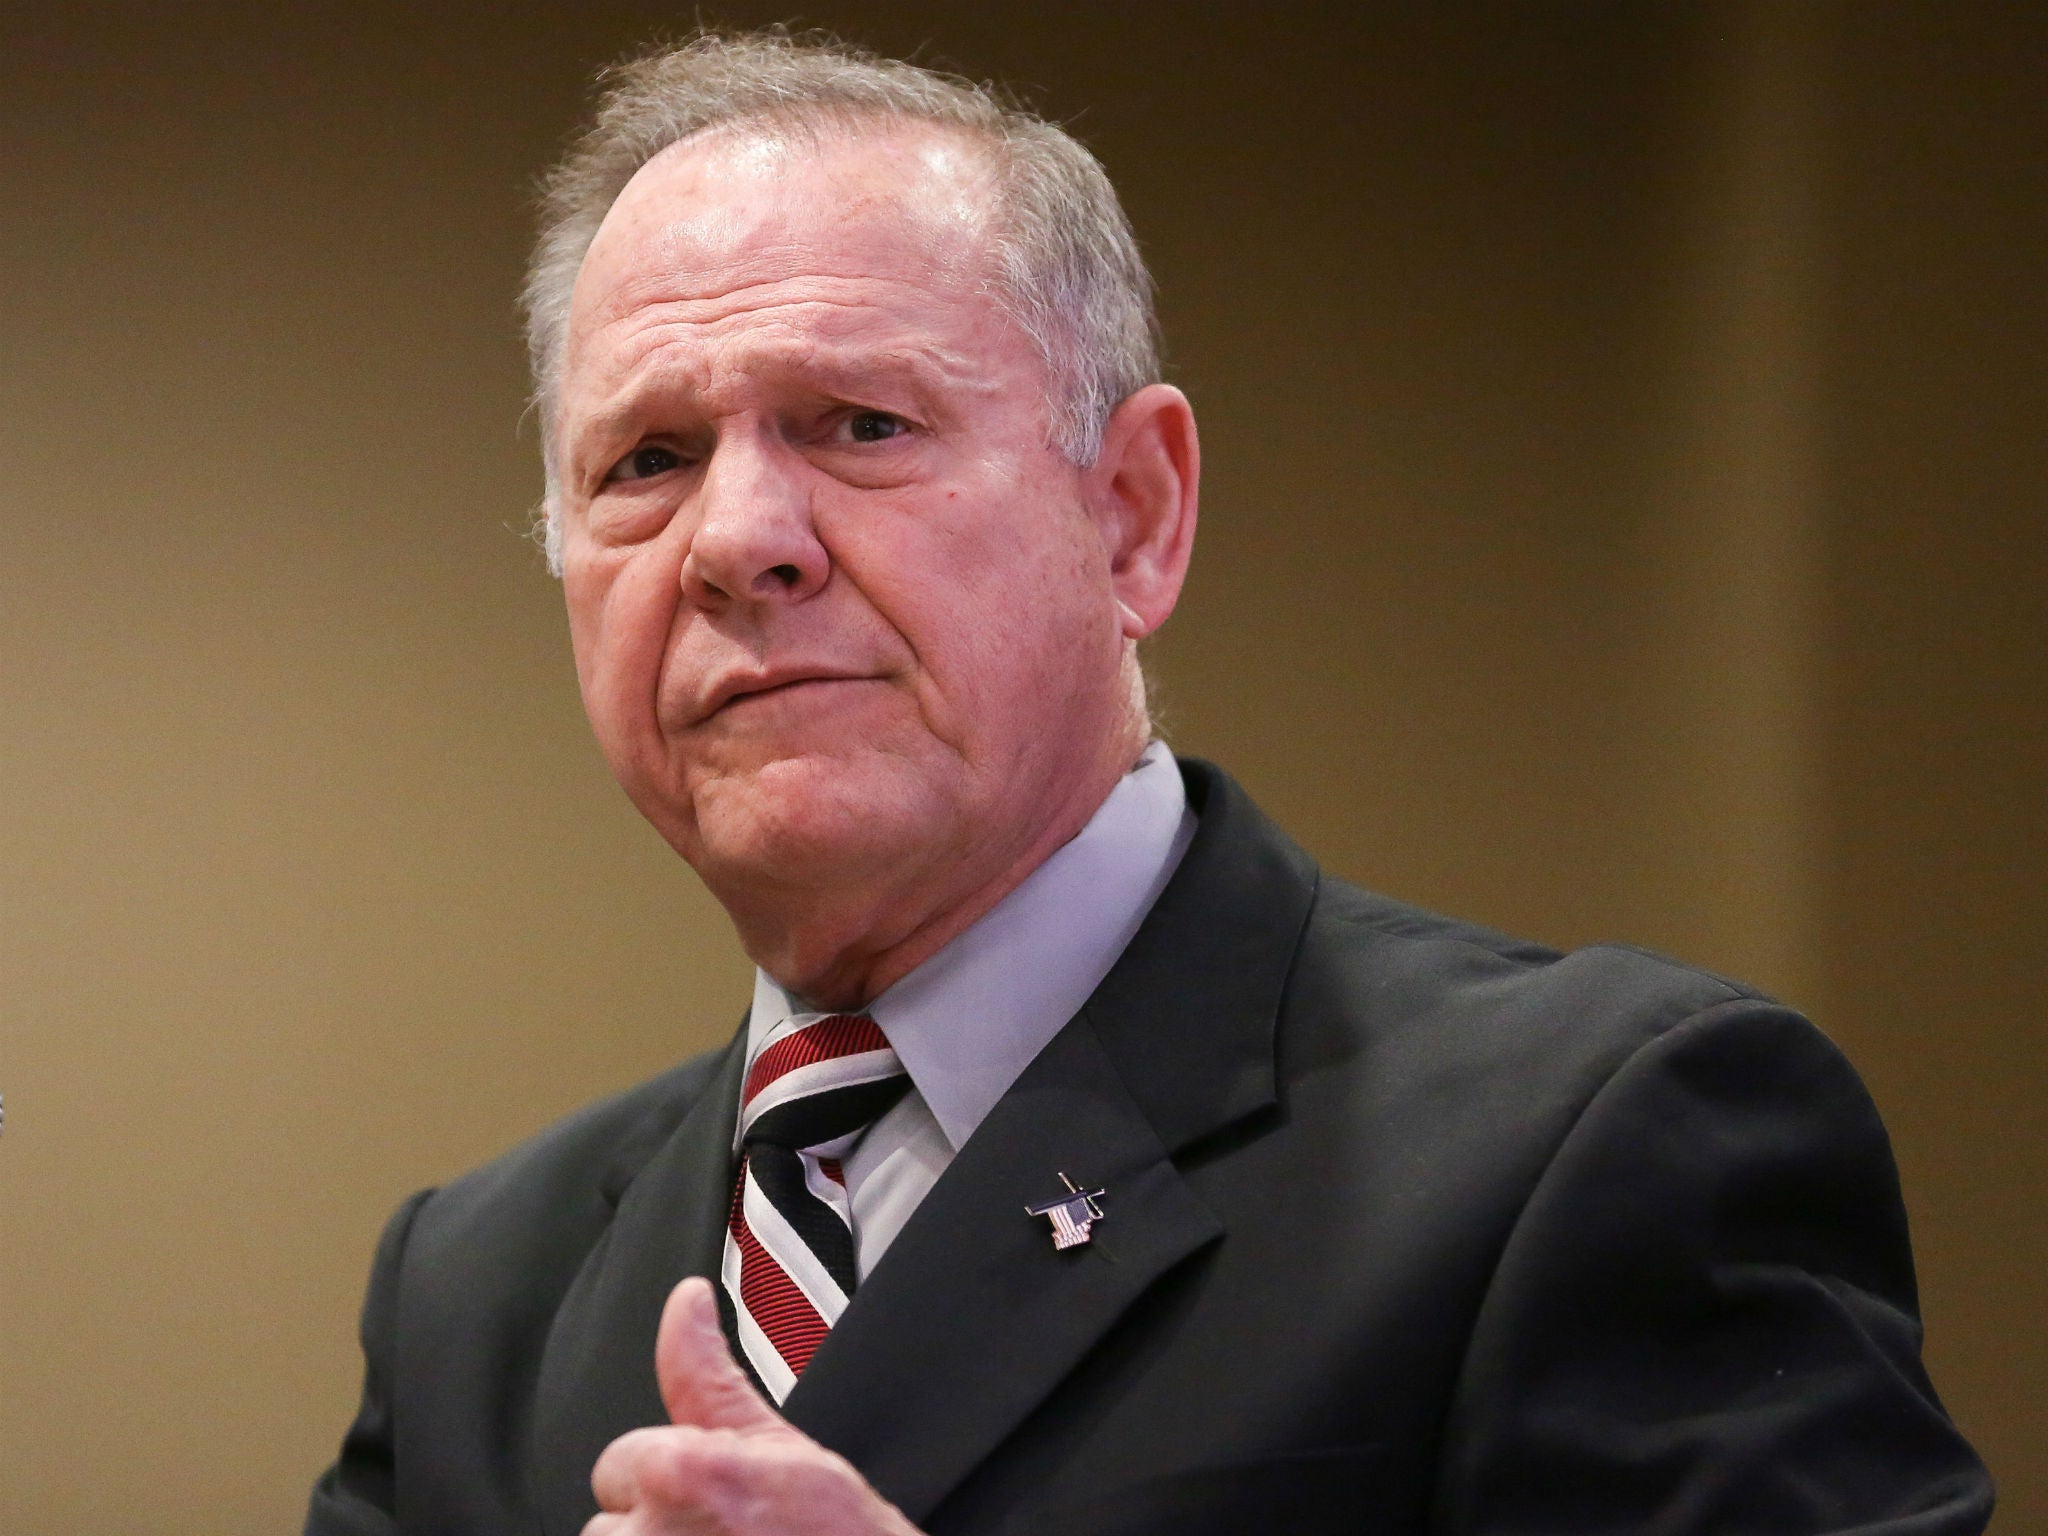 Roy Moore Faces Sixth Sexual Misconduct Allegation In A Week The Independent The Independent